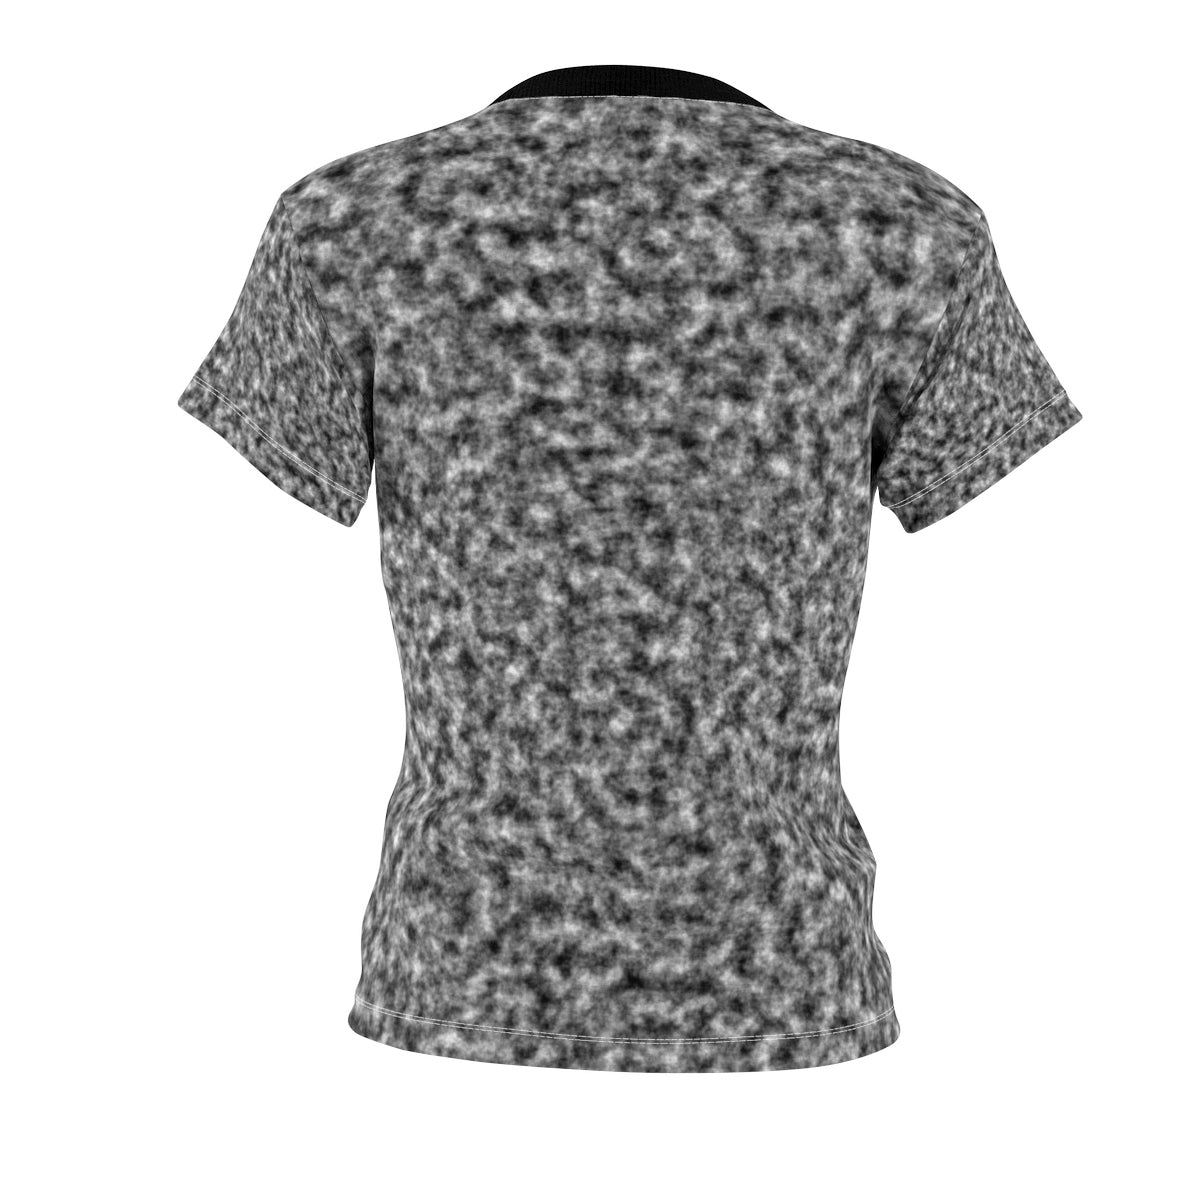 White and Black Clouds Women's Tee